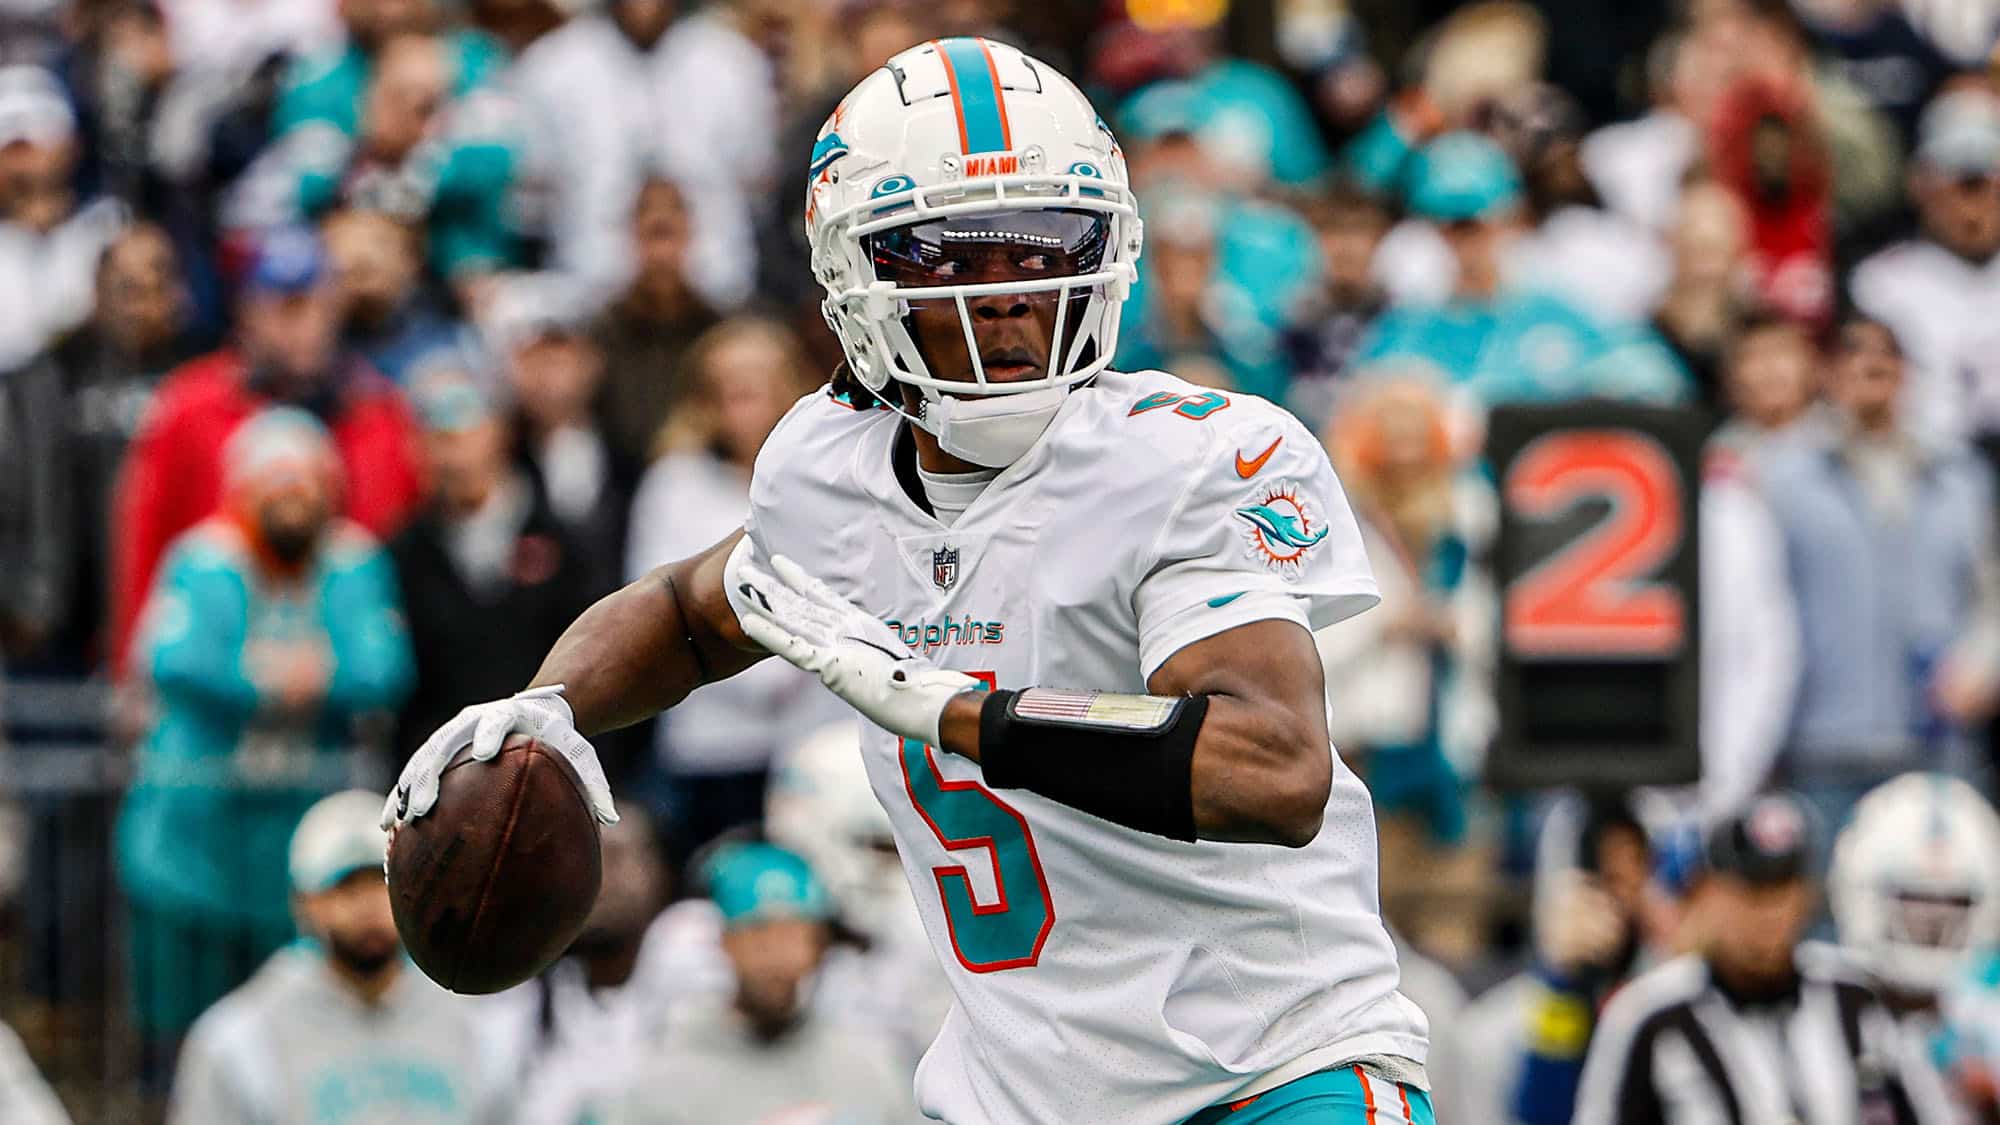 Miami Dolphins lose to Jets as Teddy Bridgewater lasts one play